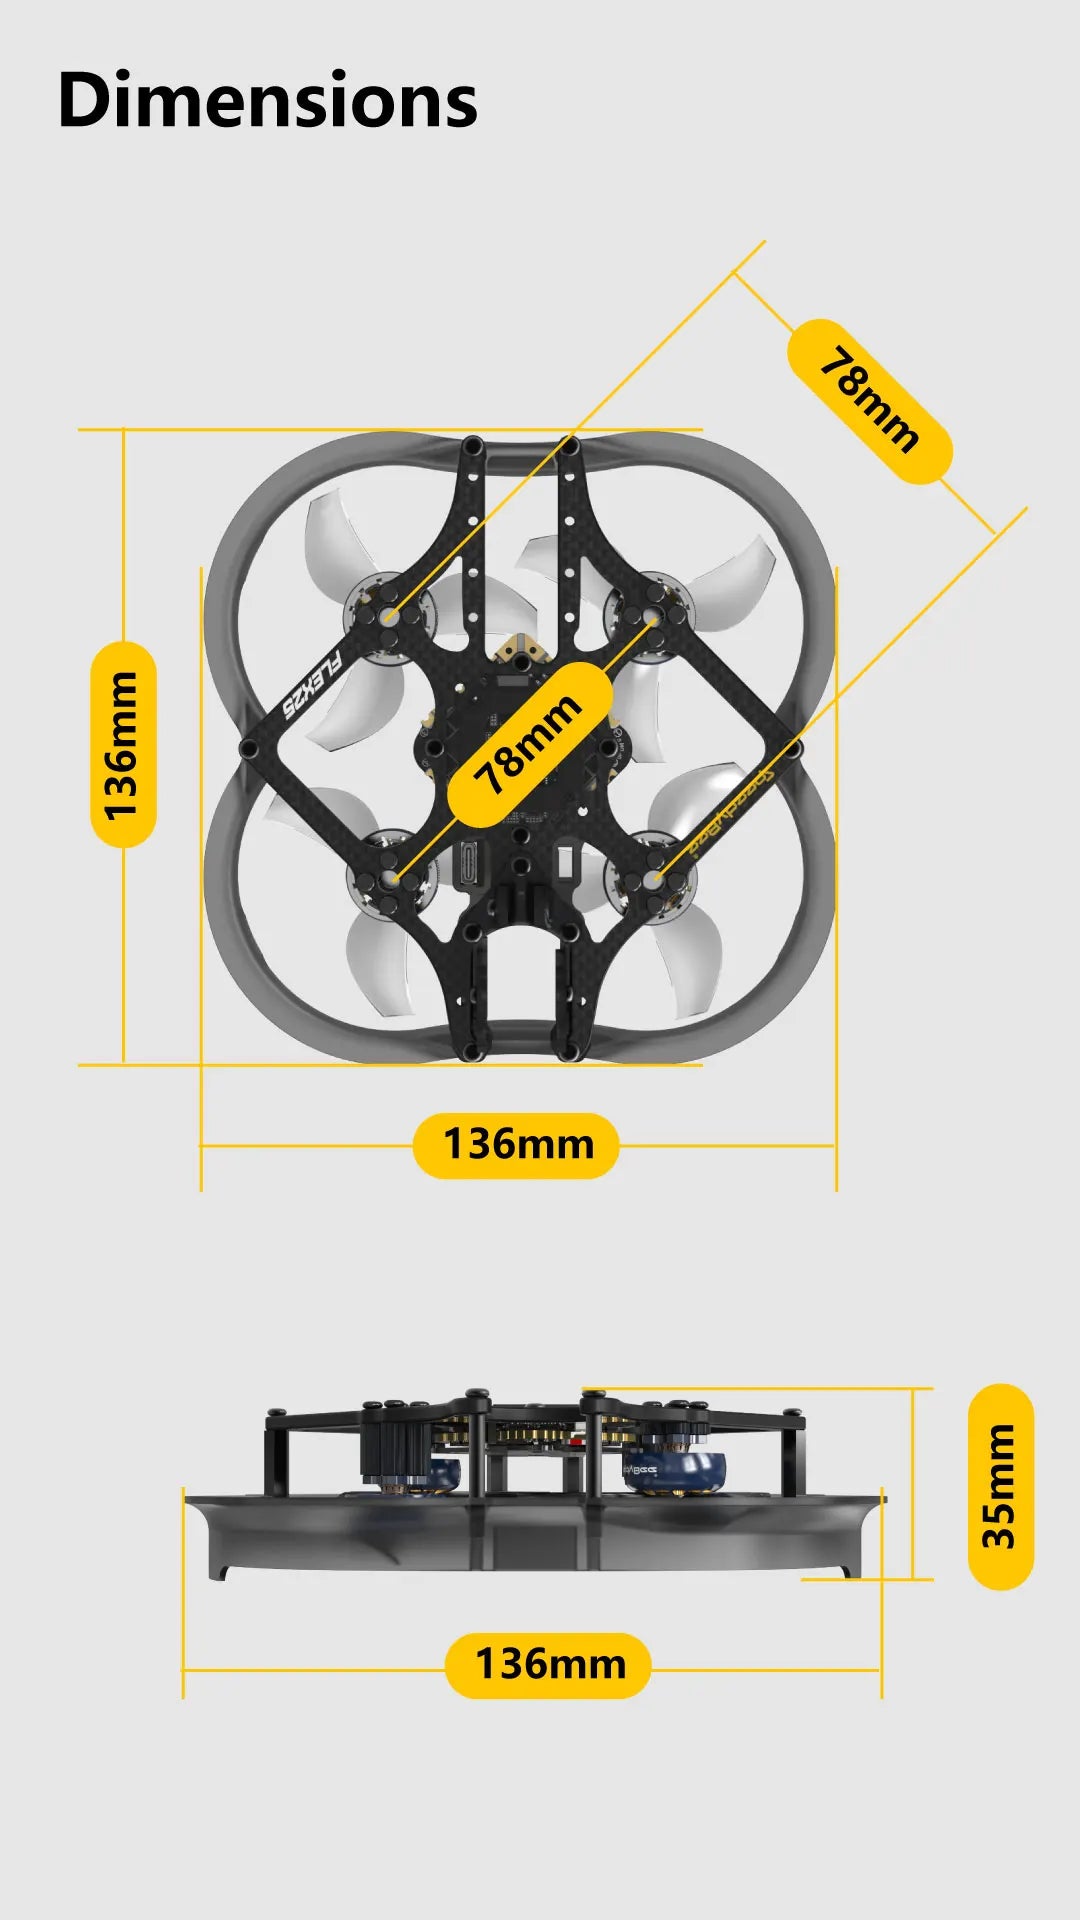 SpeedyBee F745 35A Freestyle FPV, 4 different cables* are included in the package .